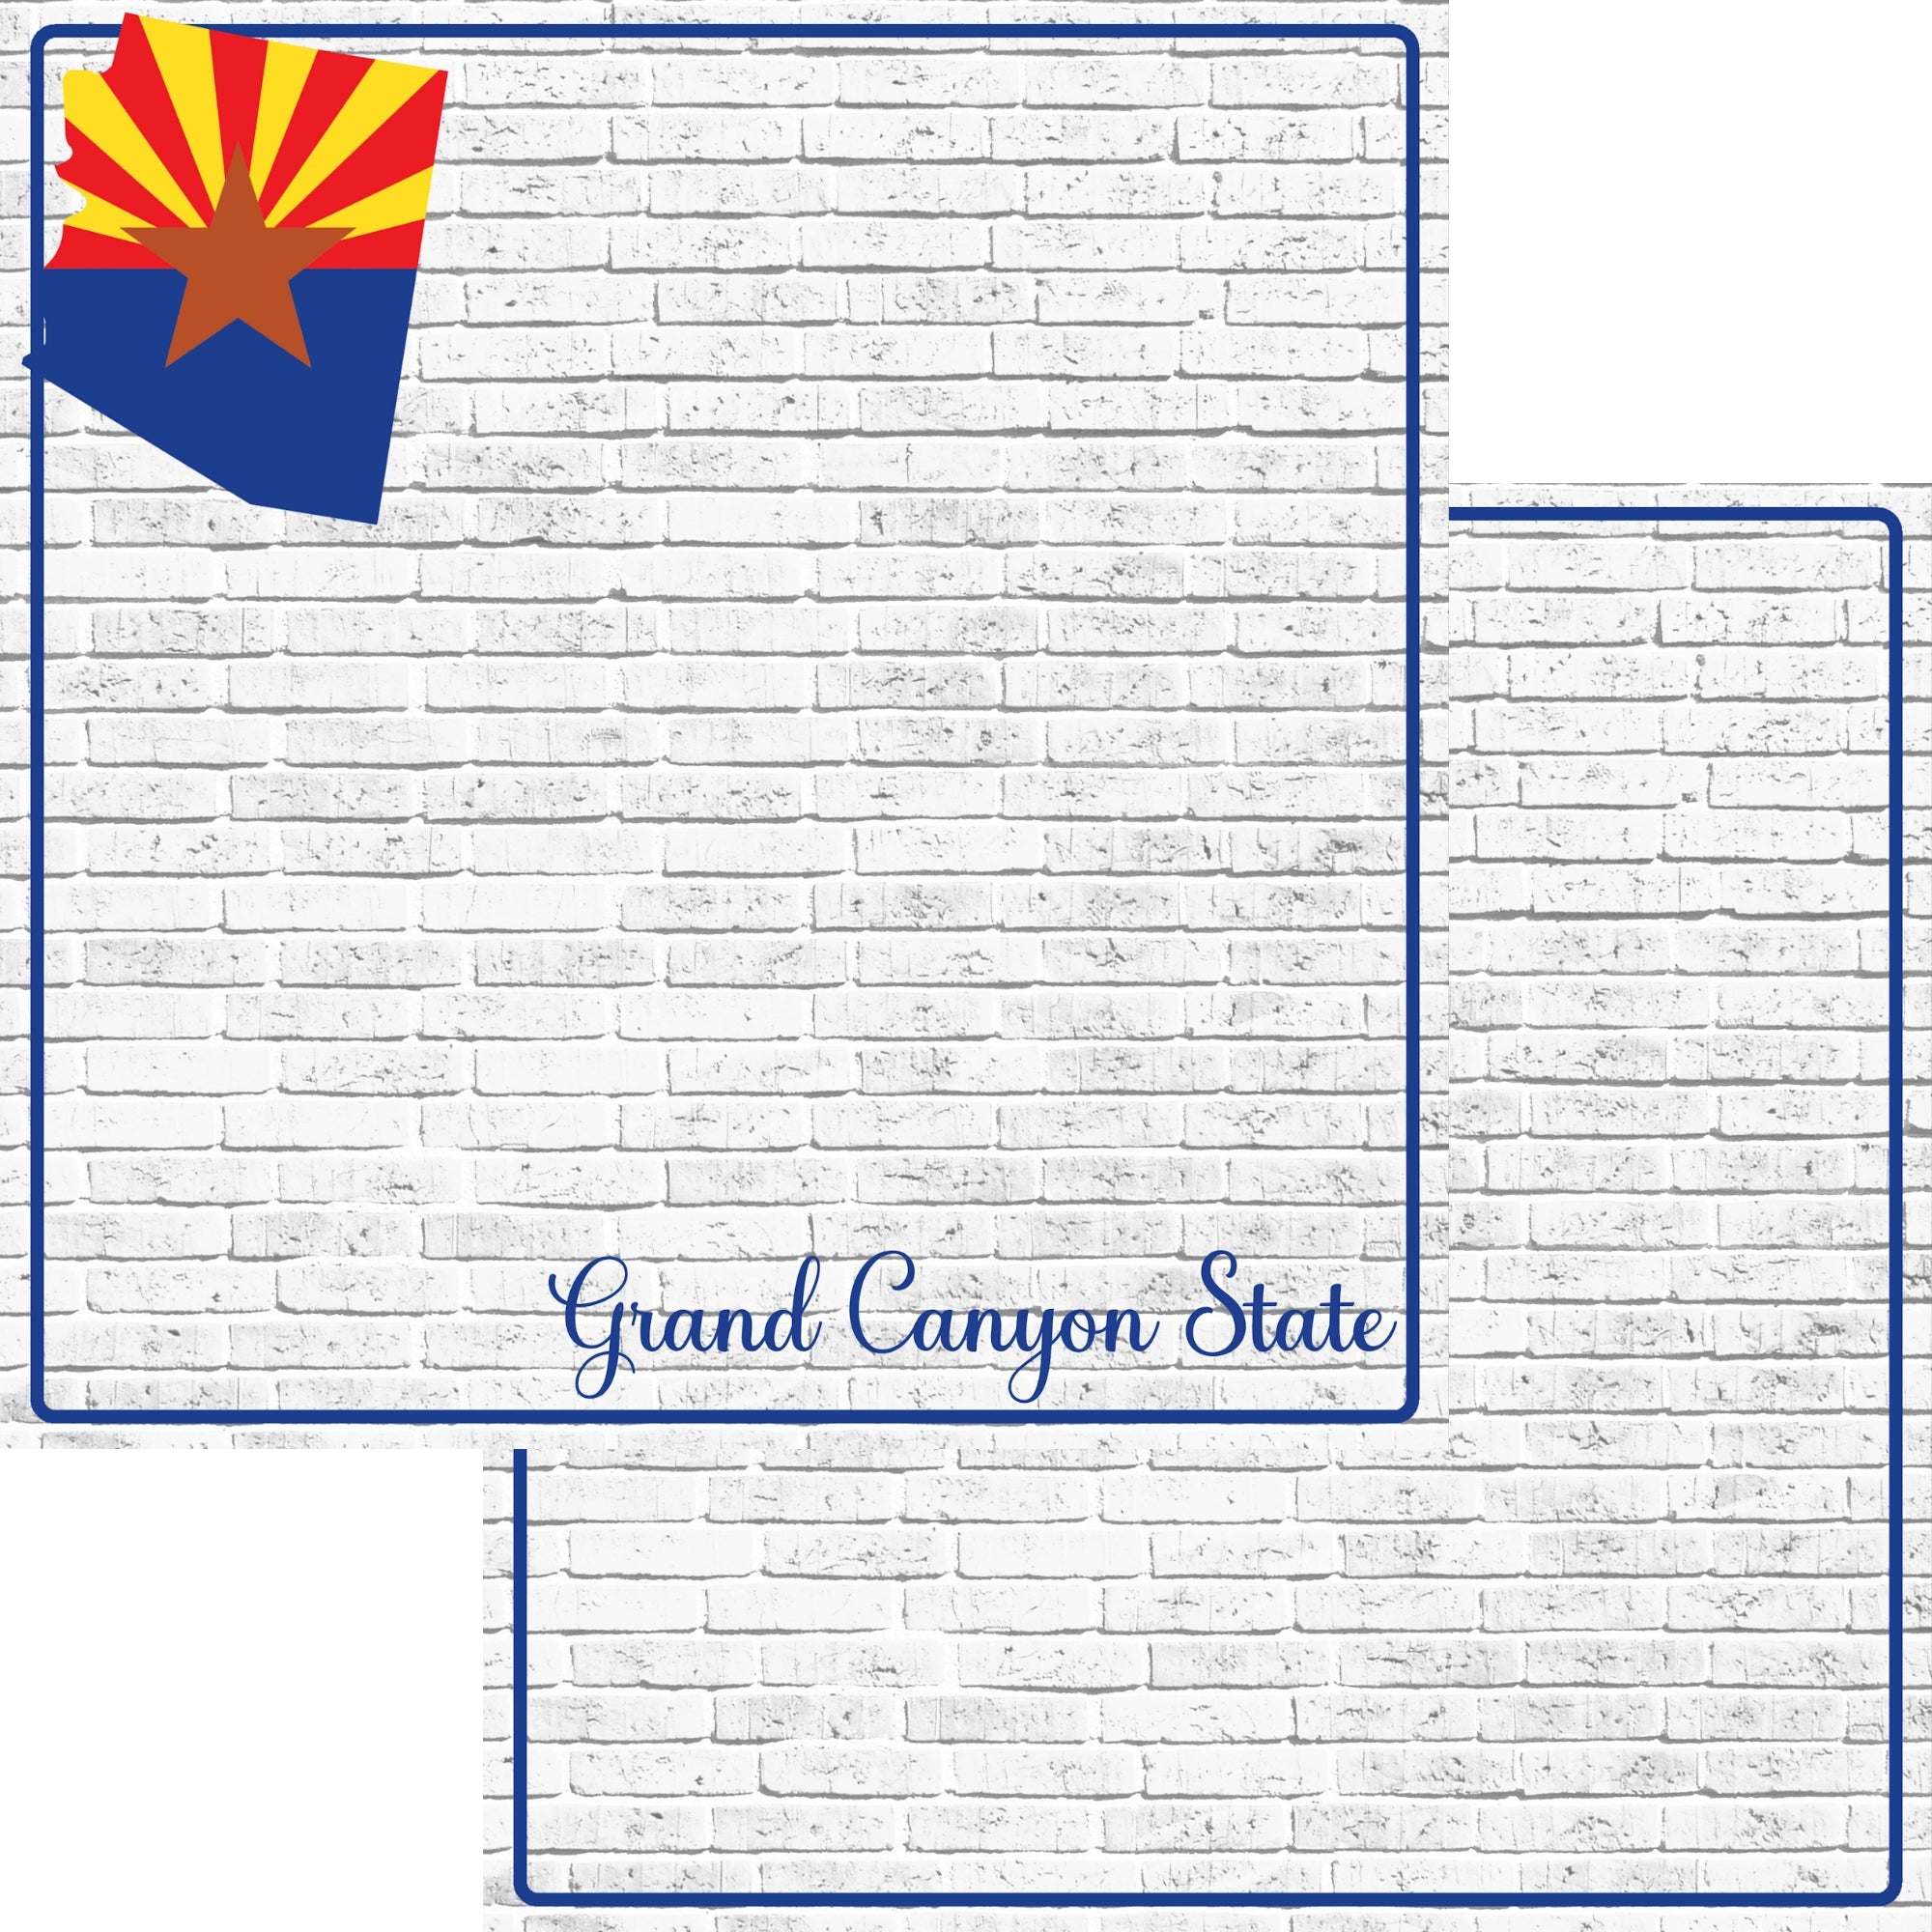 Fifty States Collection Arizona 12 x 12 Double-Sided Scrapbook Paper by SSC Designs